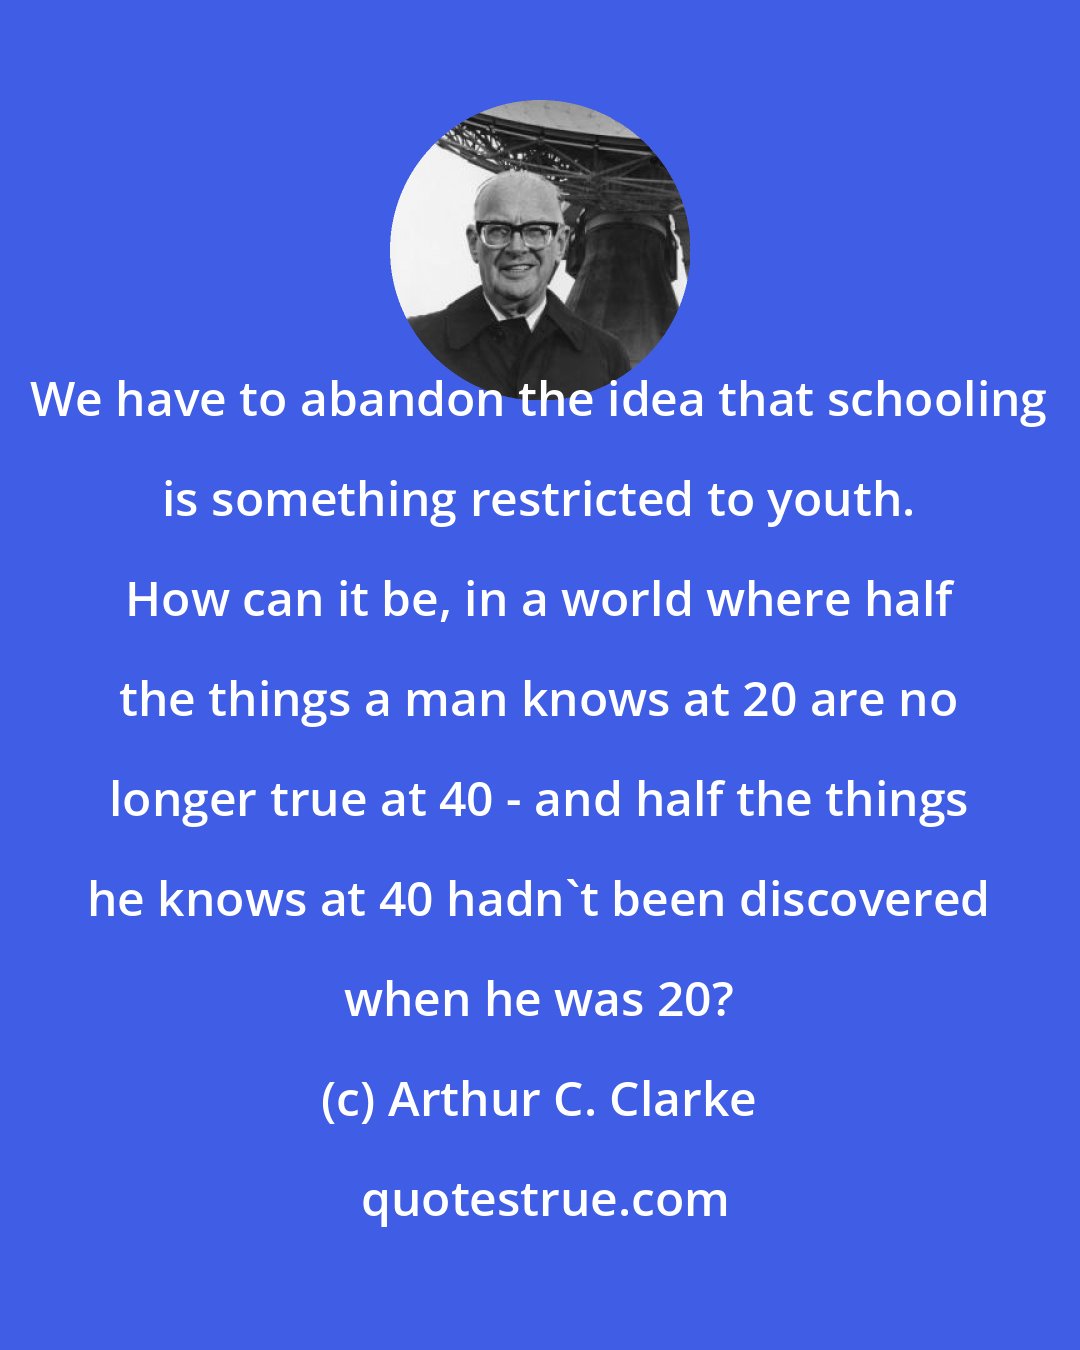 Arthur C. Clarke: We have to abandon the idea that schooling is something restricted to youth. How can it be, in a world where half the things a man knows at 20 are no longer true at 40 - and half the things he knows at 40 hadn't been discovered when he was 20?